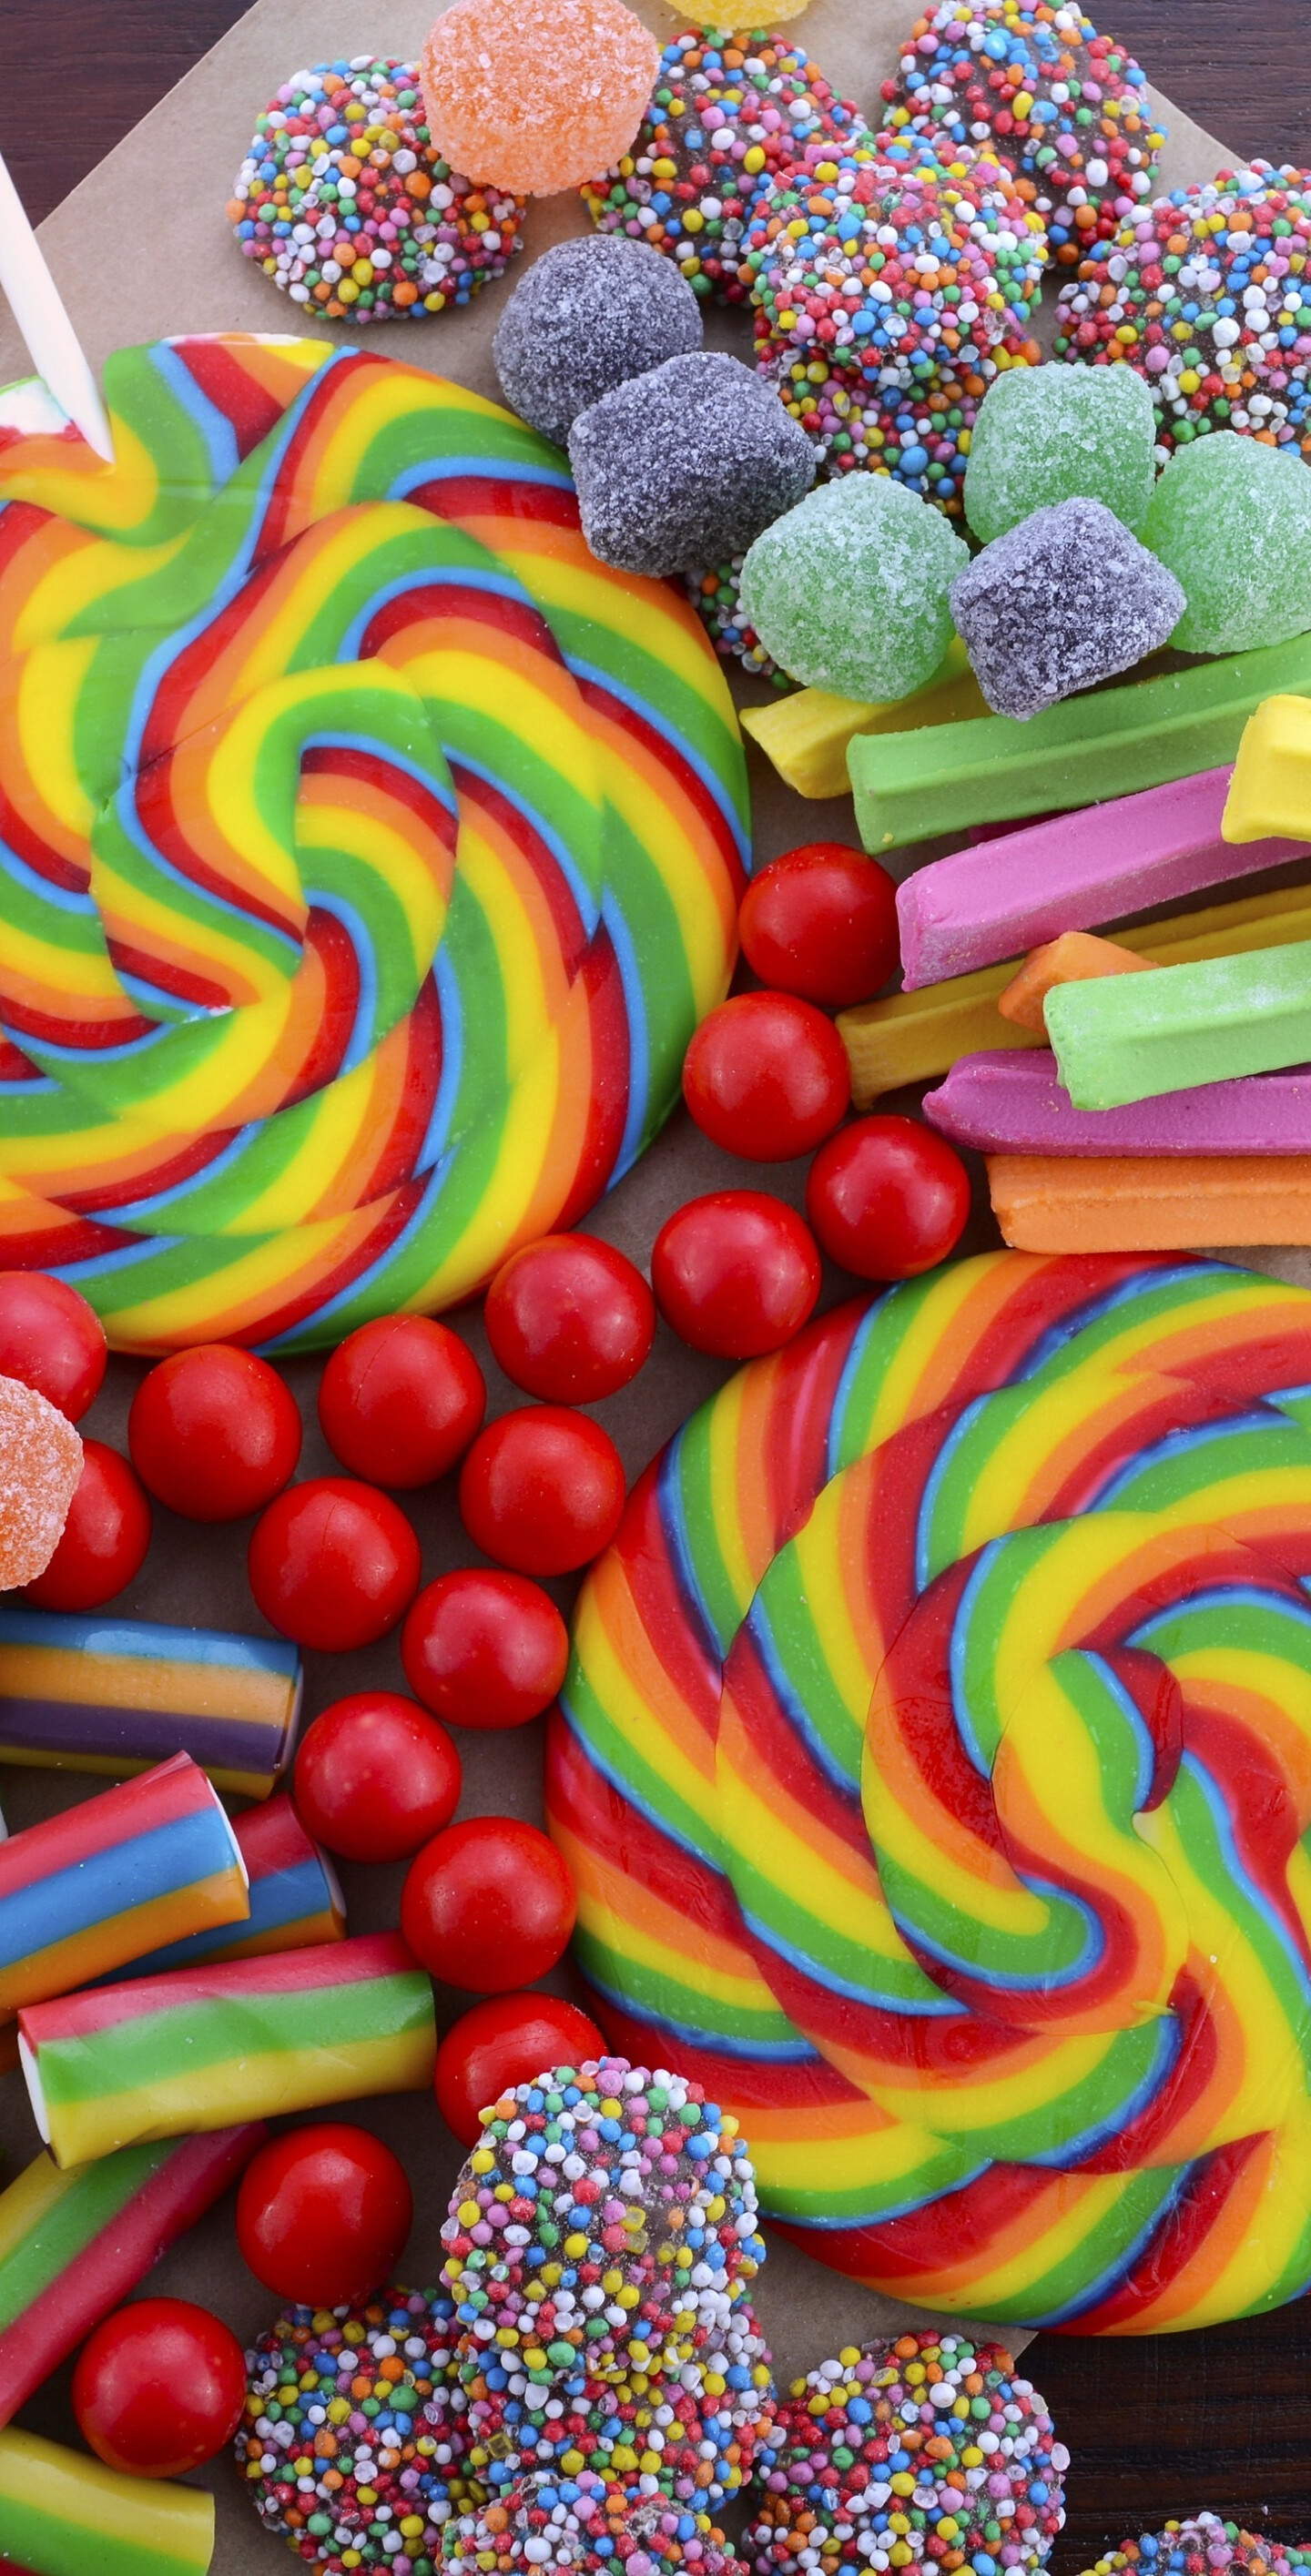 Colorful candy extravaganza, Samsung Galaxy S8 wallpaper, Sweet tooth's paradise, Luscious sweetness, 1440x2830 HD Phone